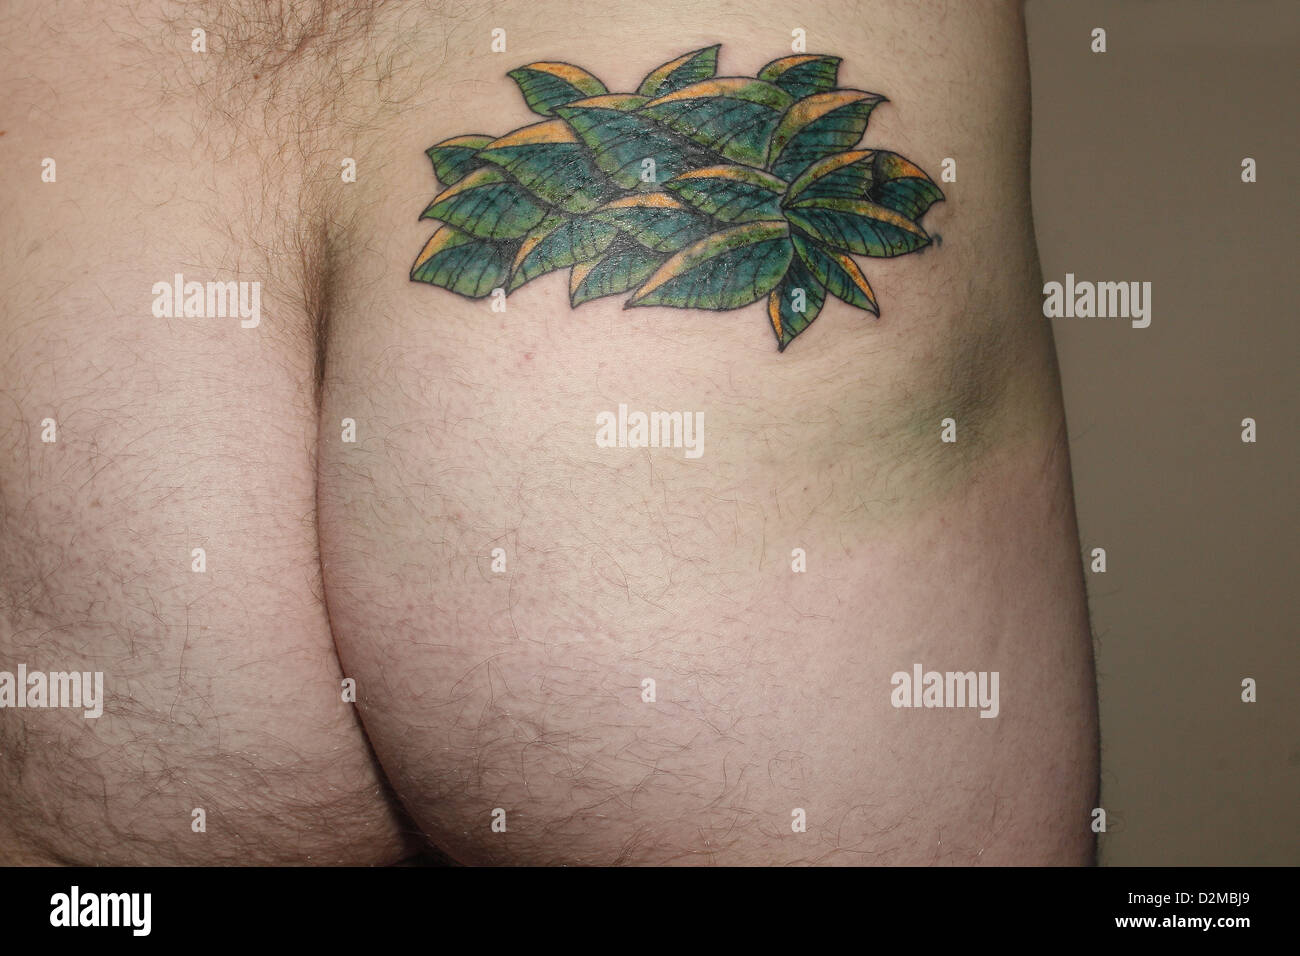 leaf tattoo on male right buttock Stock Photo